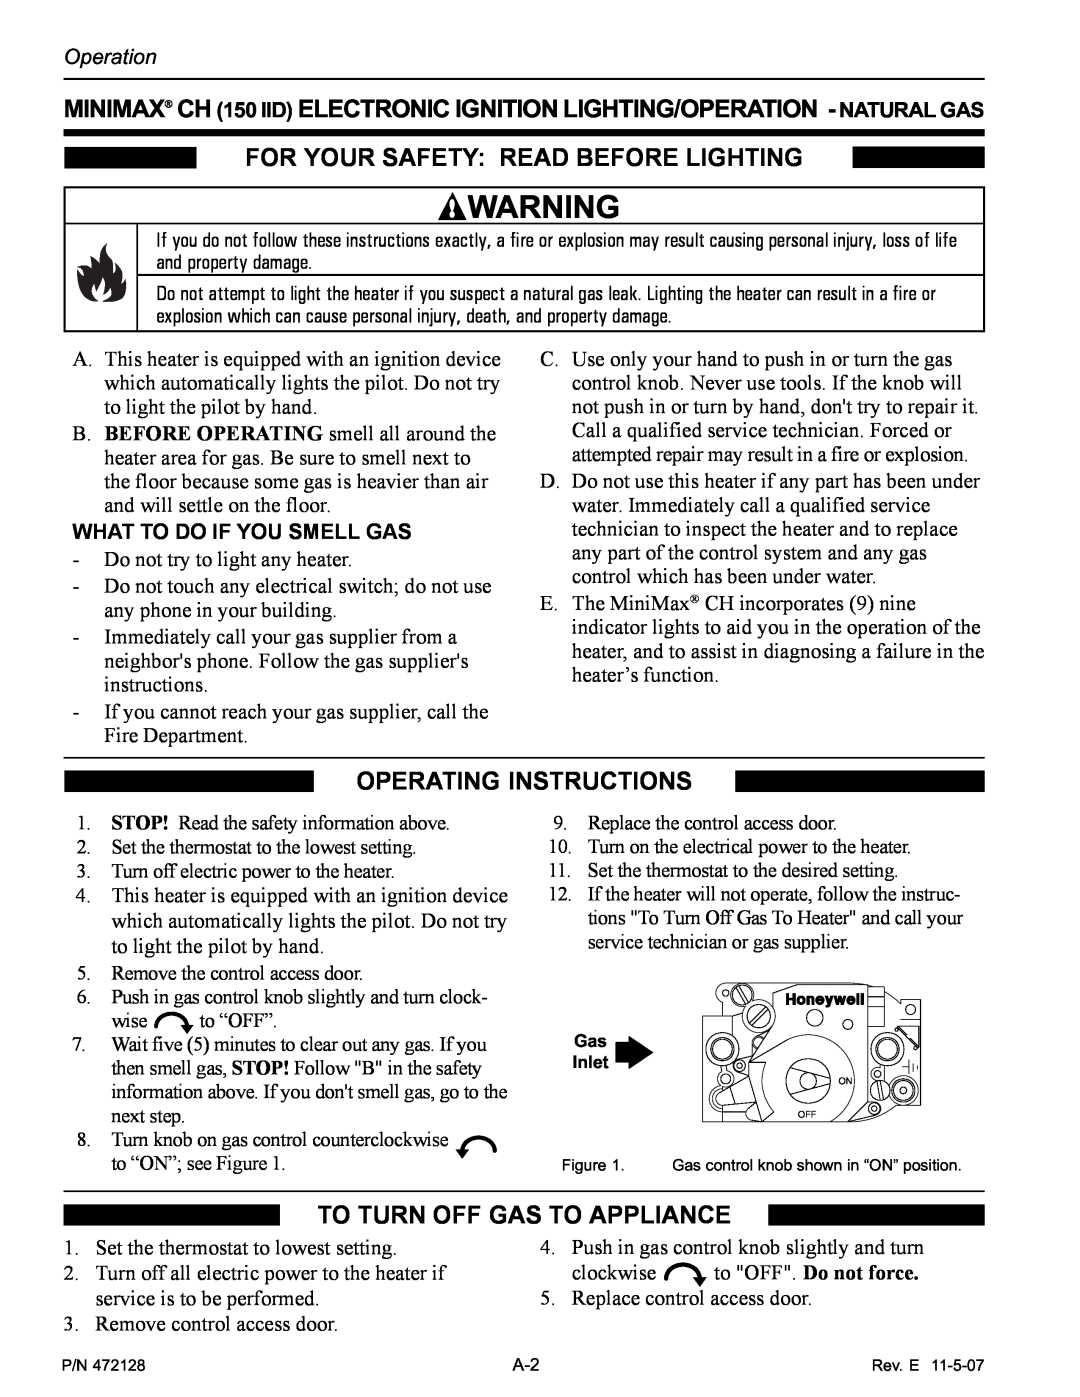 Pentair Hot Tub manual Operating Instructions, To Turn Off Gas To Appliance, For Your Safety Read Before Lighting 